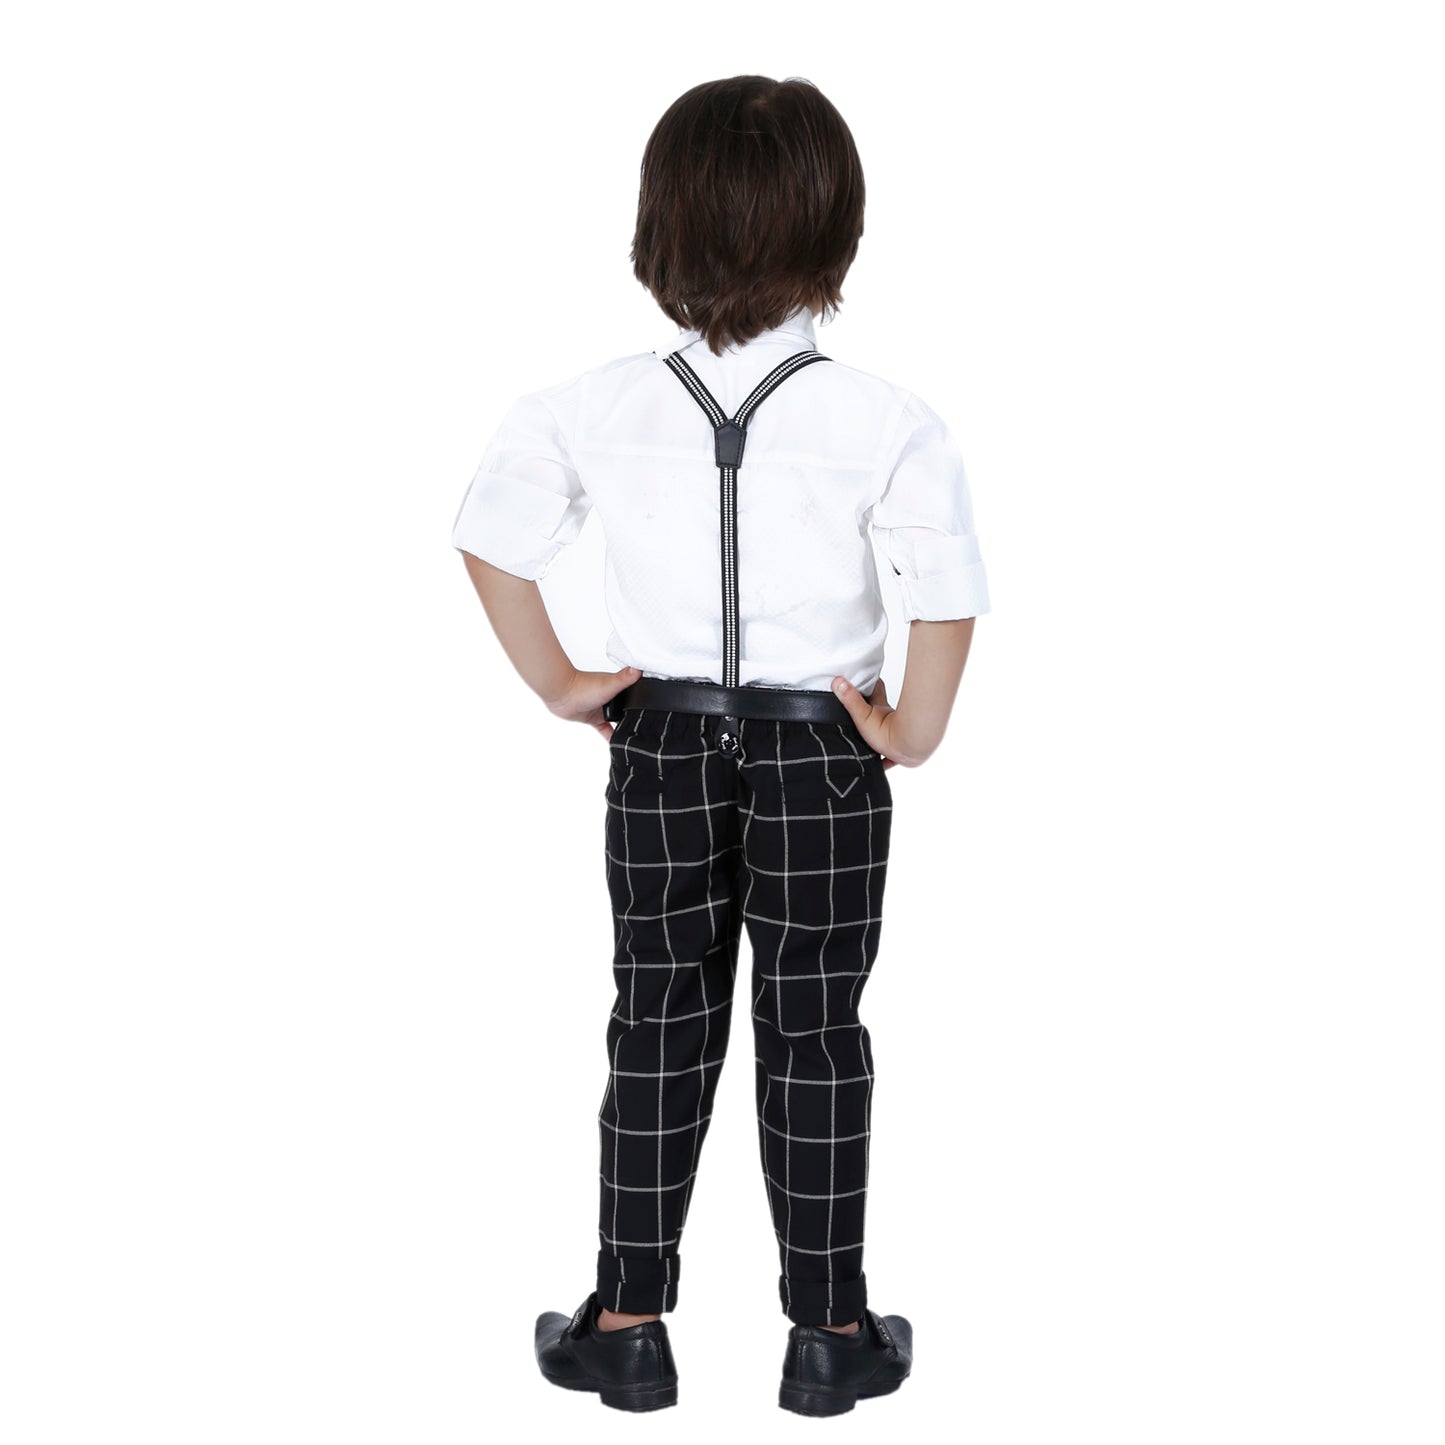 Plaid Party wear outfit with suspenders and bow tie. - mashup boys